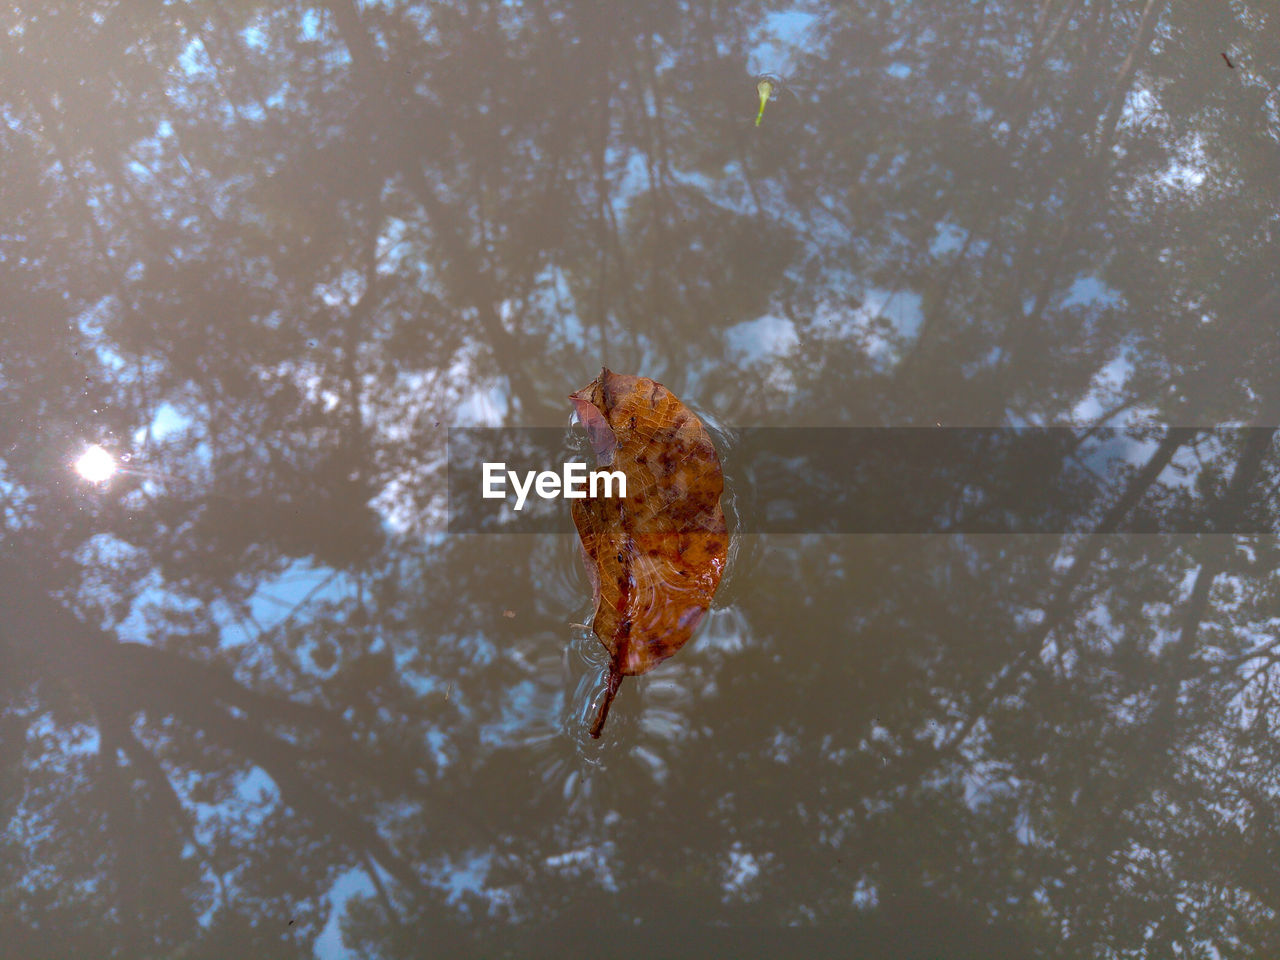 HIGH ANGLE VIEW OF A LEAF FLOATING ON WATER